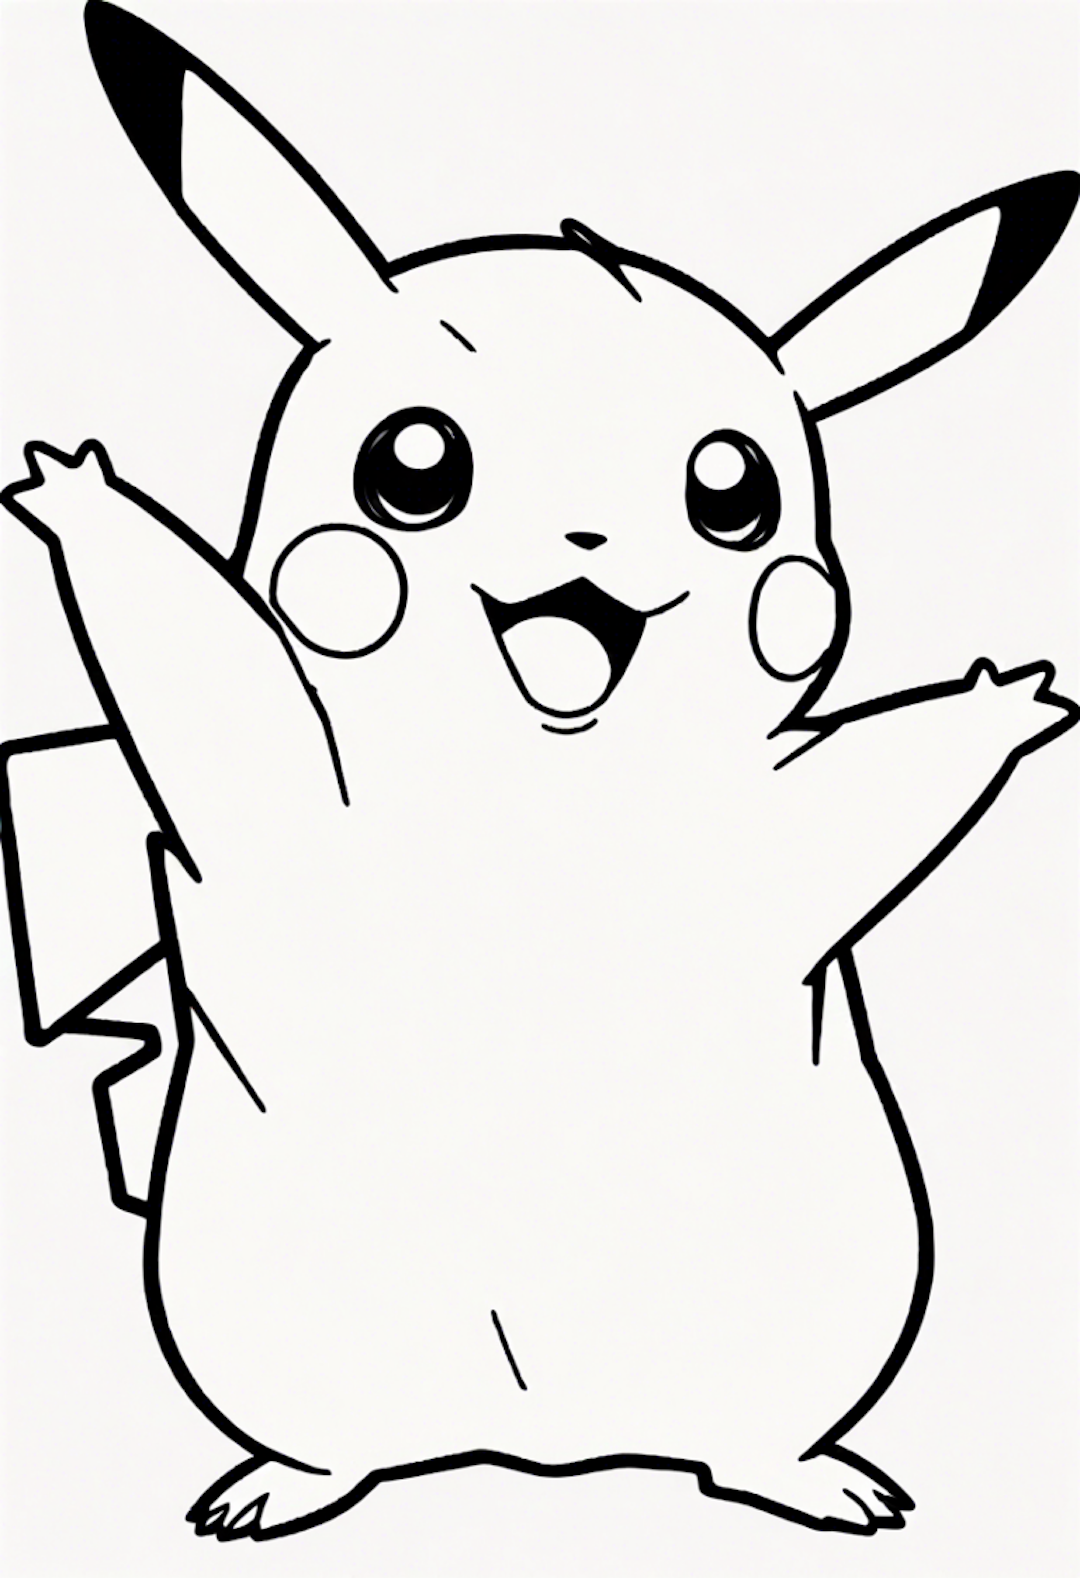 Pikachu’s Happy Day Coloring Page coloring pages